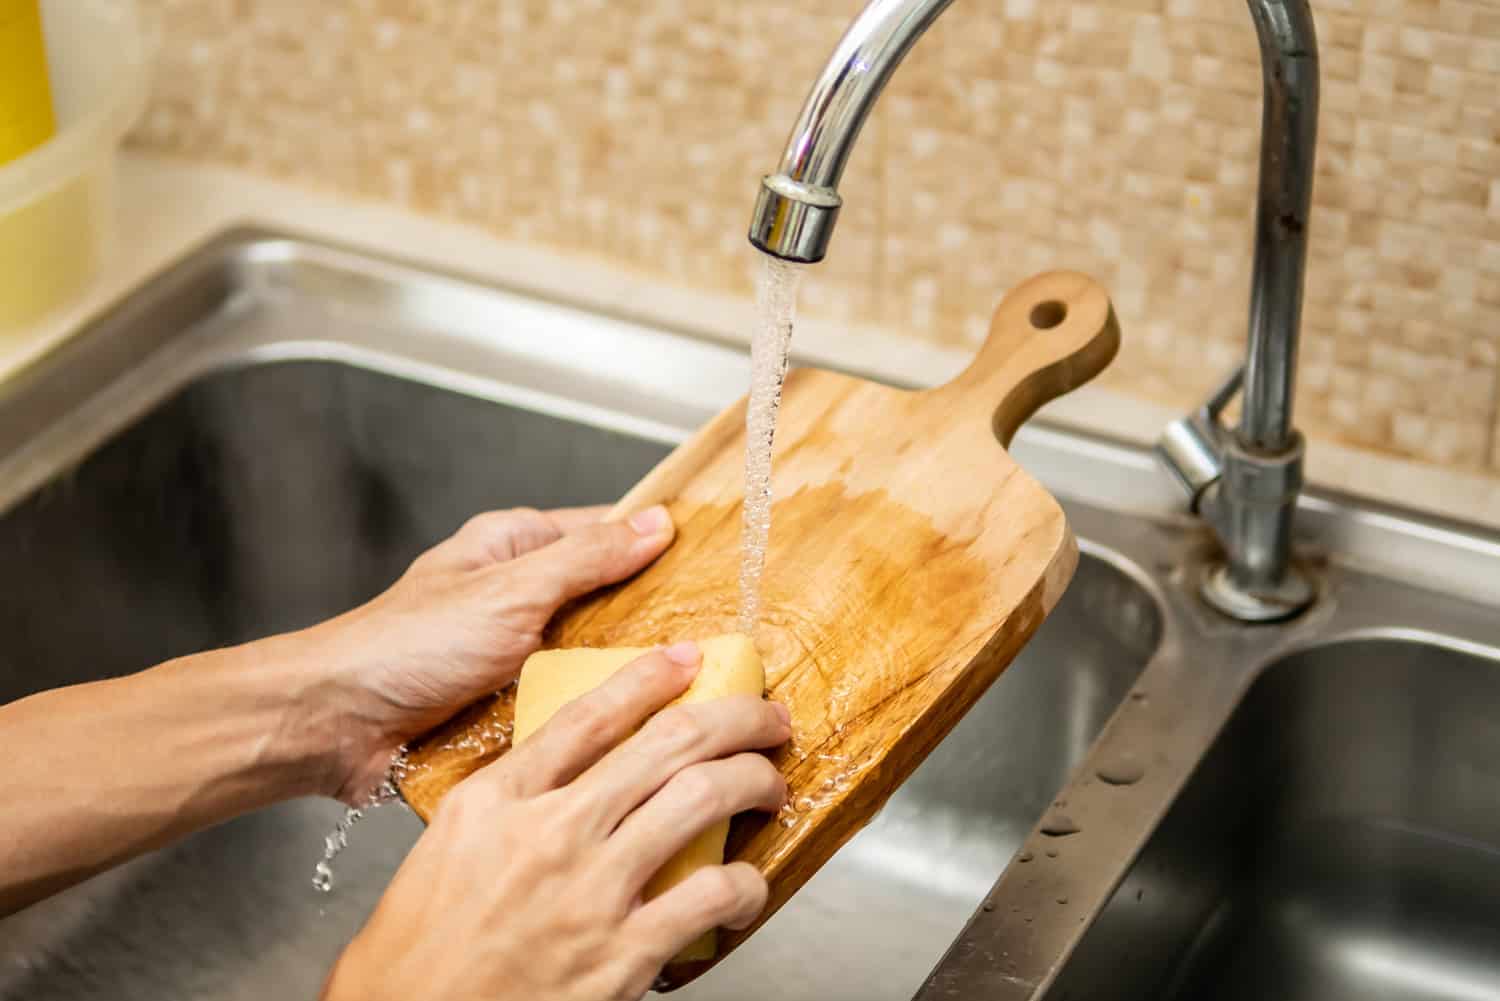 Cleaning wood cutting board in kitchen sink